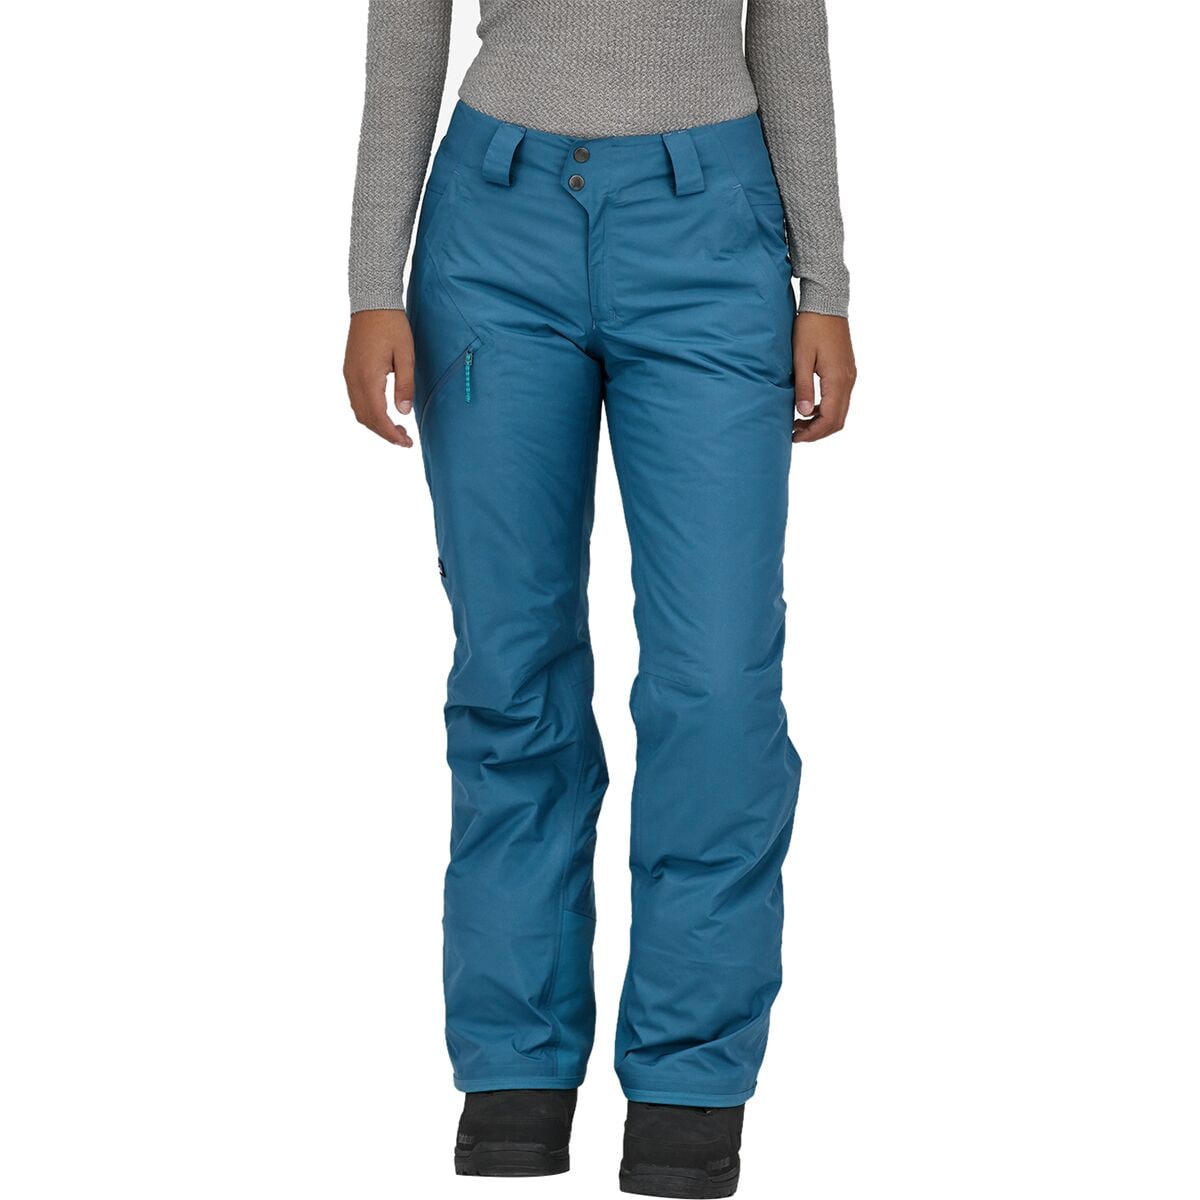 Insulated Powder Town Pant - Women